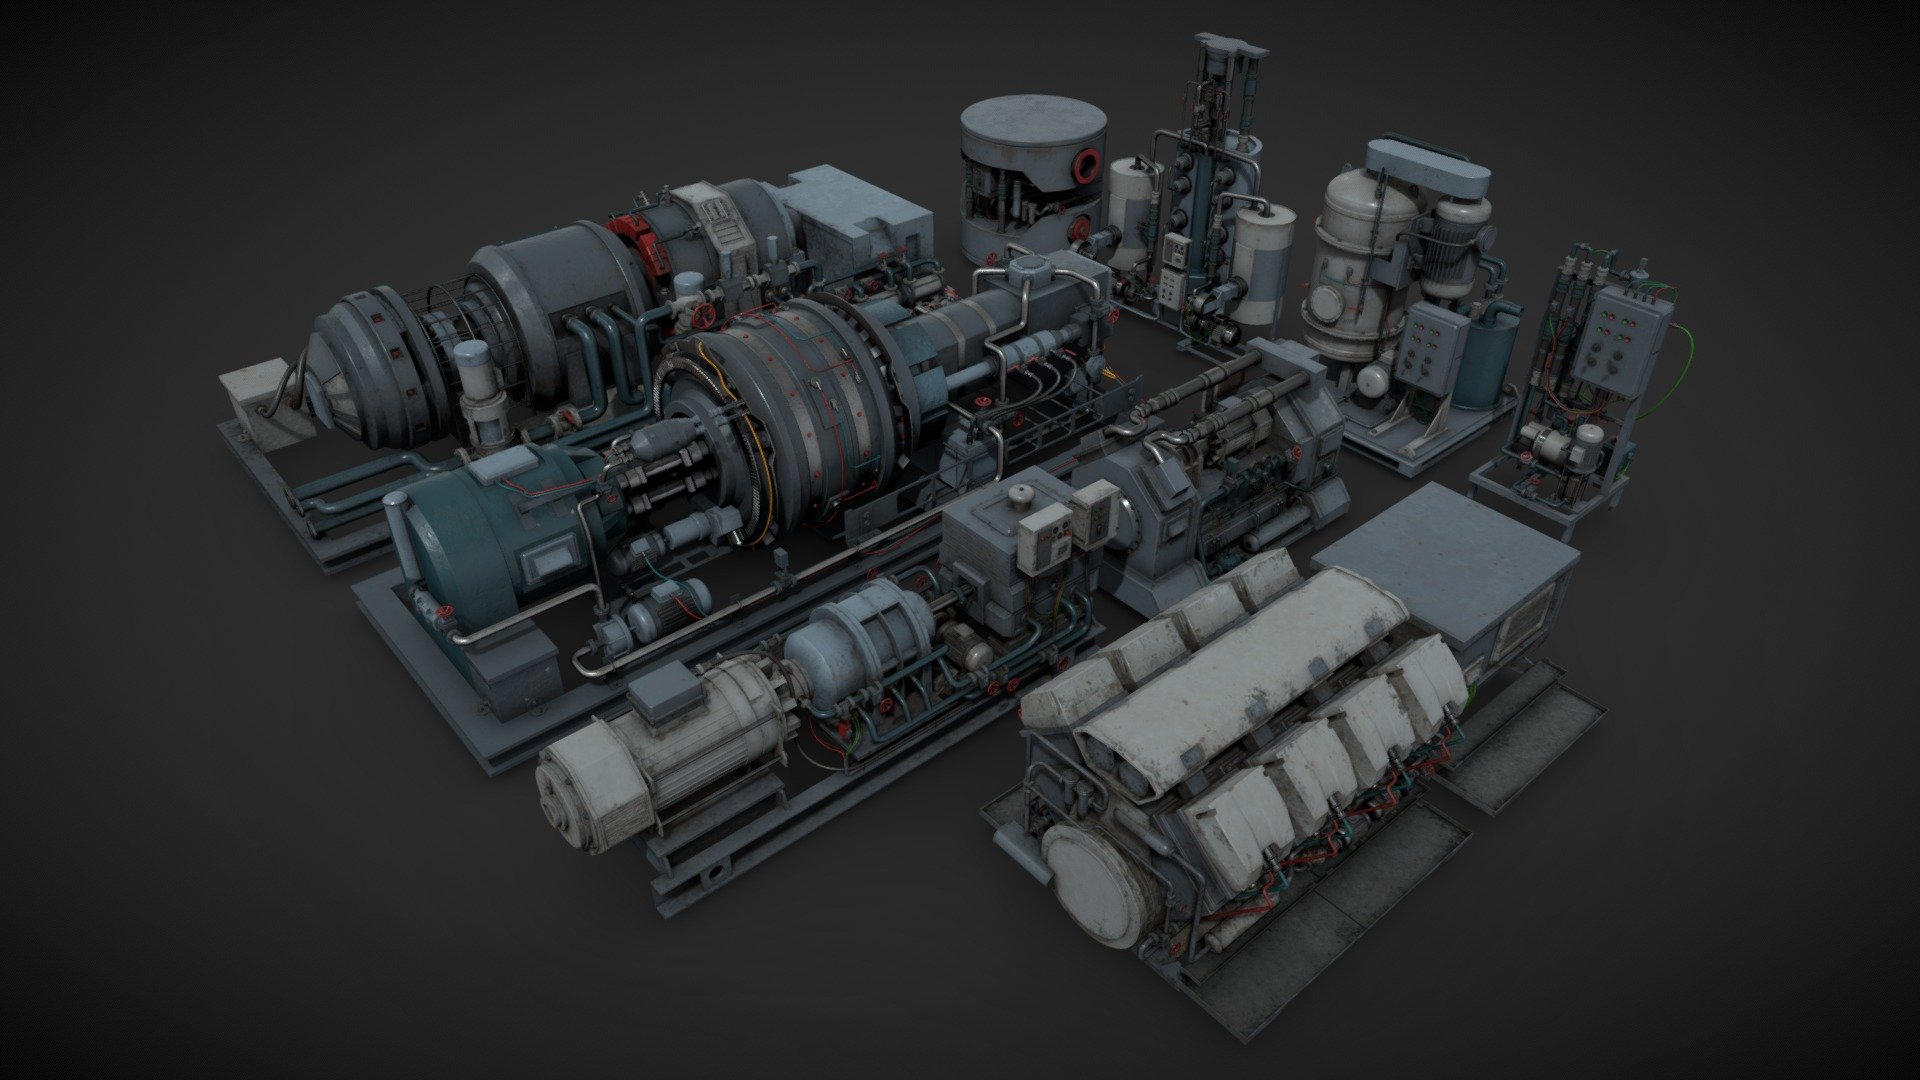 9 models of machinery devices for industrial visualizations 

Painted and heavy rusted PBR textures included 

Non overlapping UVs 3d model